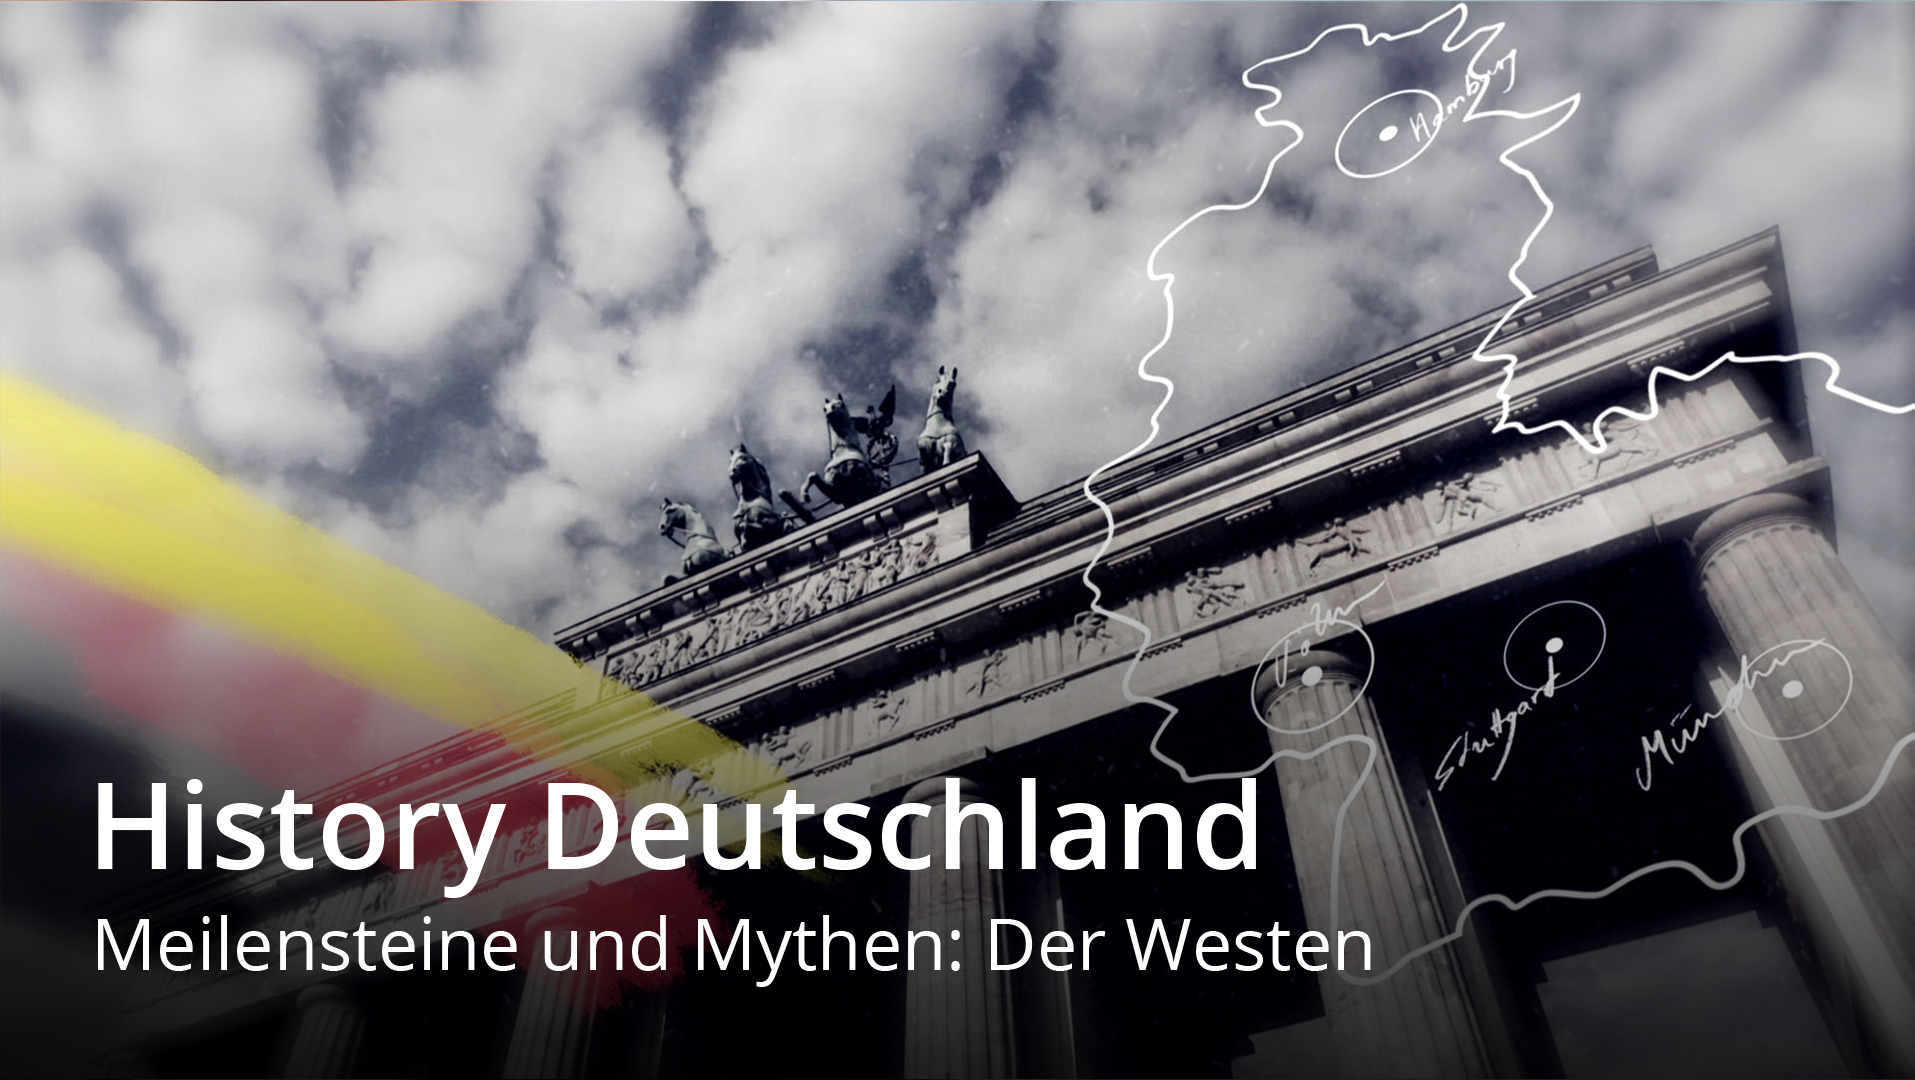 Milestones and myths: West Germany